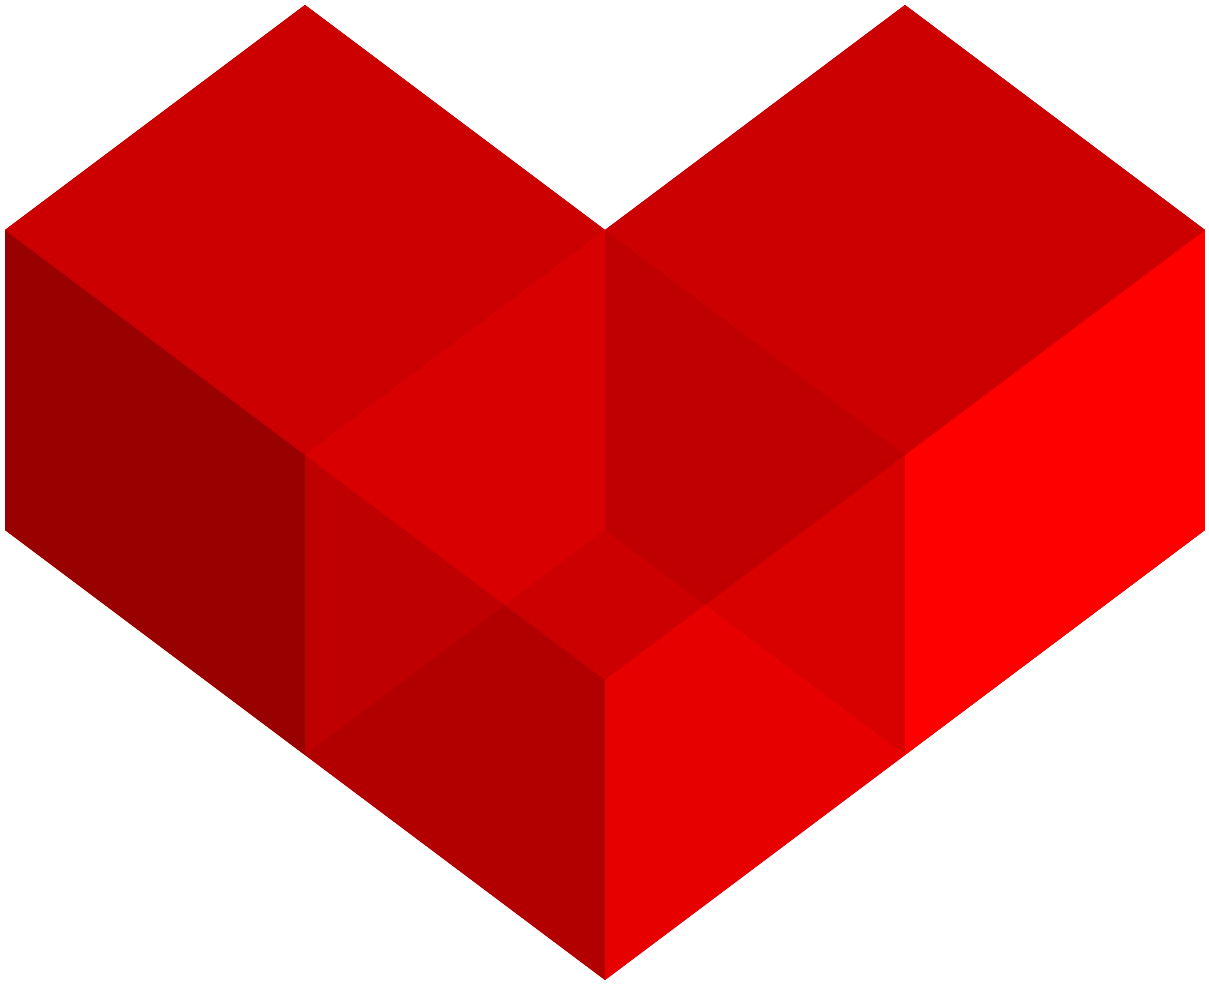 A Red Cubes In A Shape Of A Heart